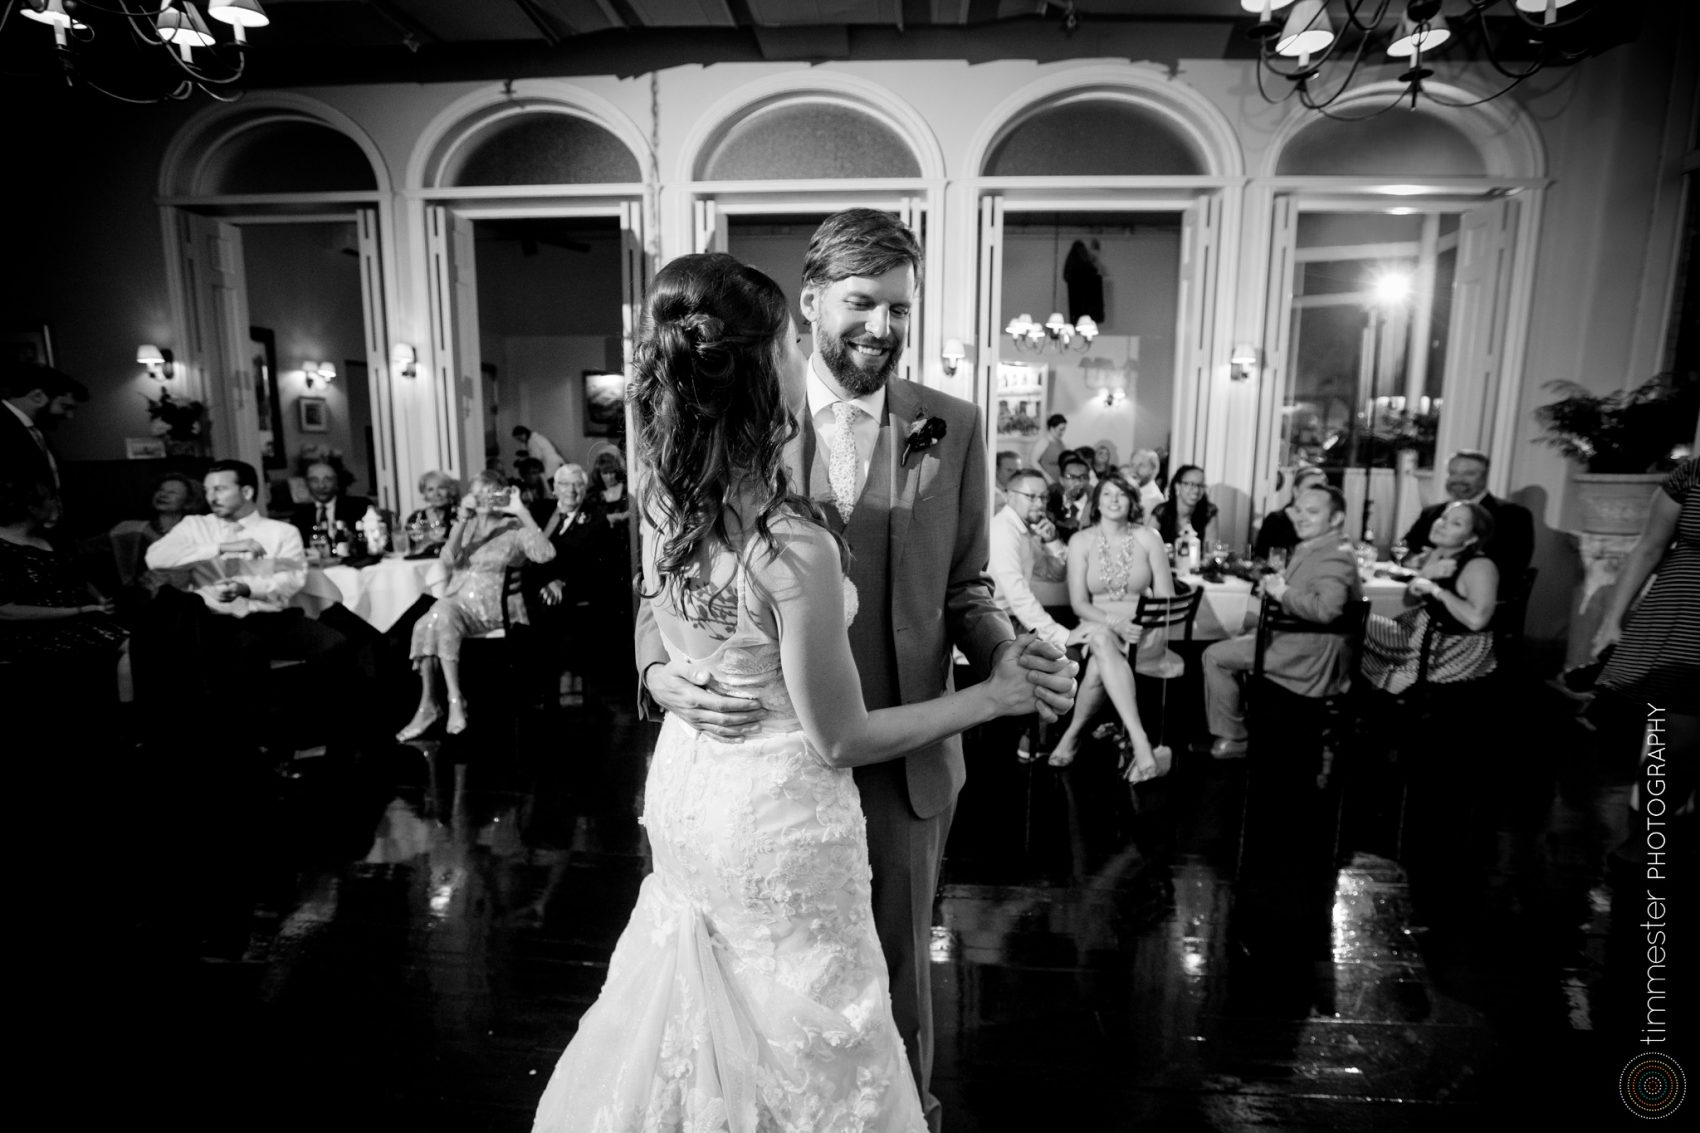 The First Dance between bride and groom at Caffe Luna in Raleigh, North Carolina.